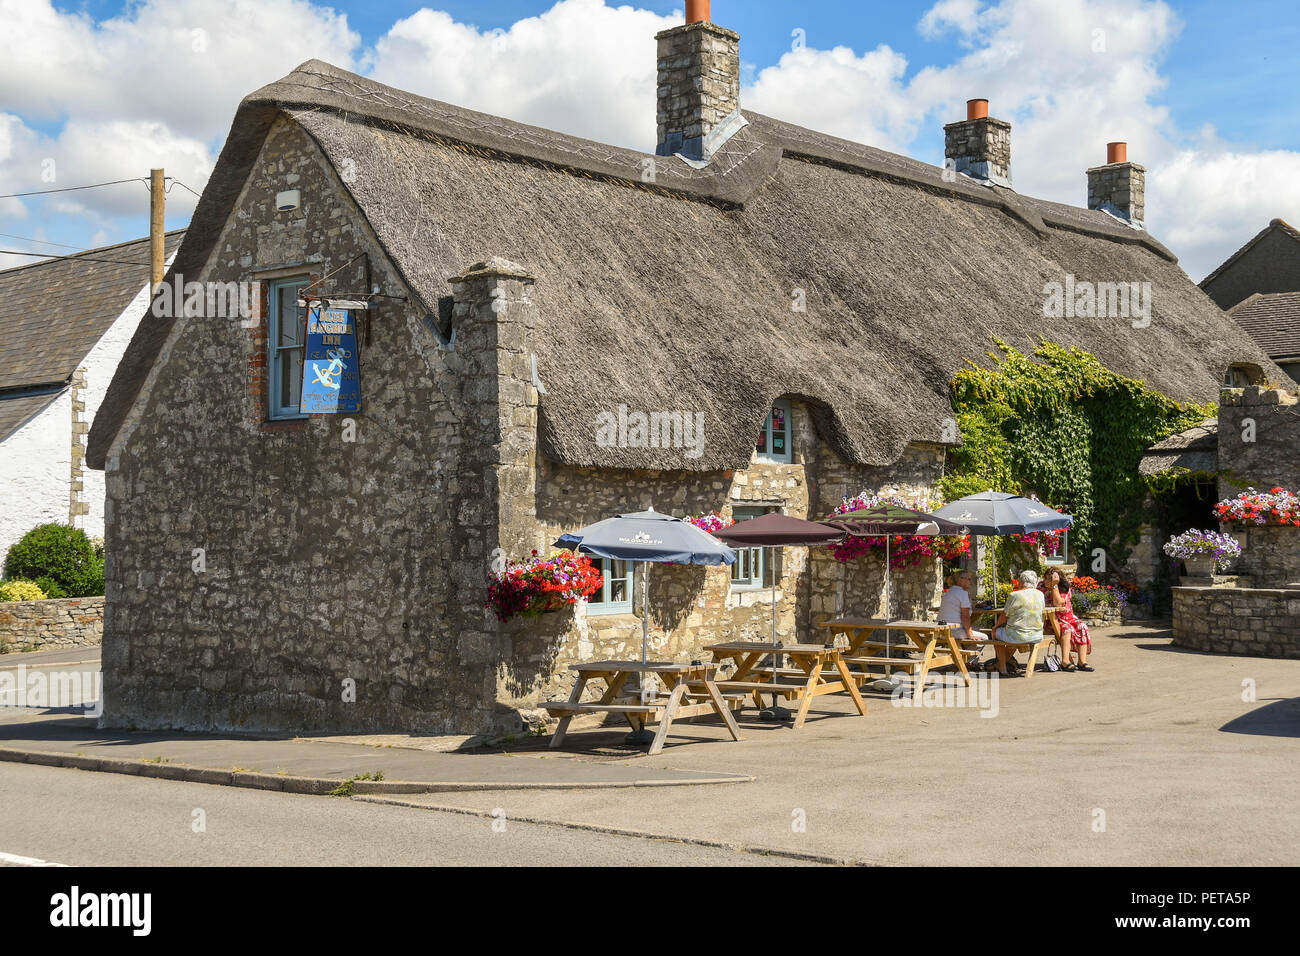 The Blue Anchor Inn, an old traditional public house with a thatched roof in Aberthaw near Barry, Wales. Stock Photo